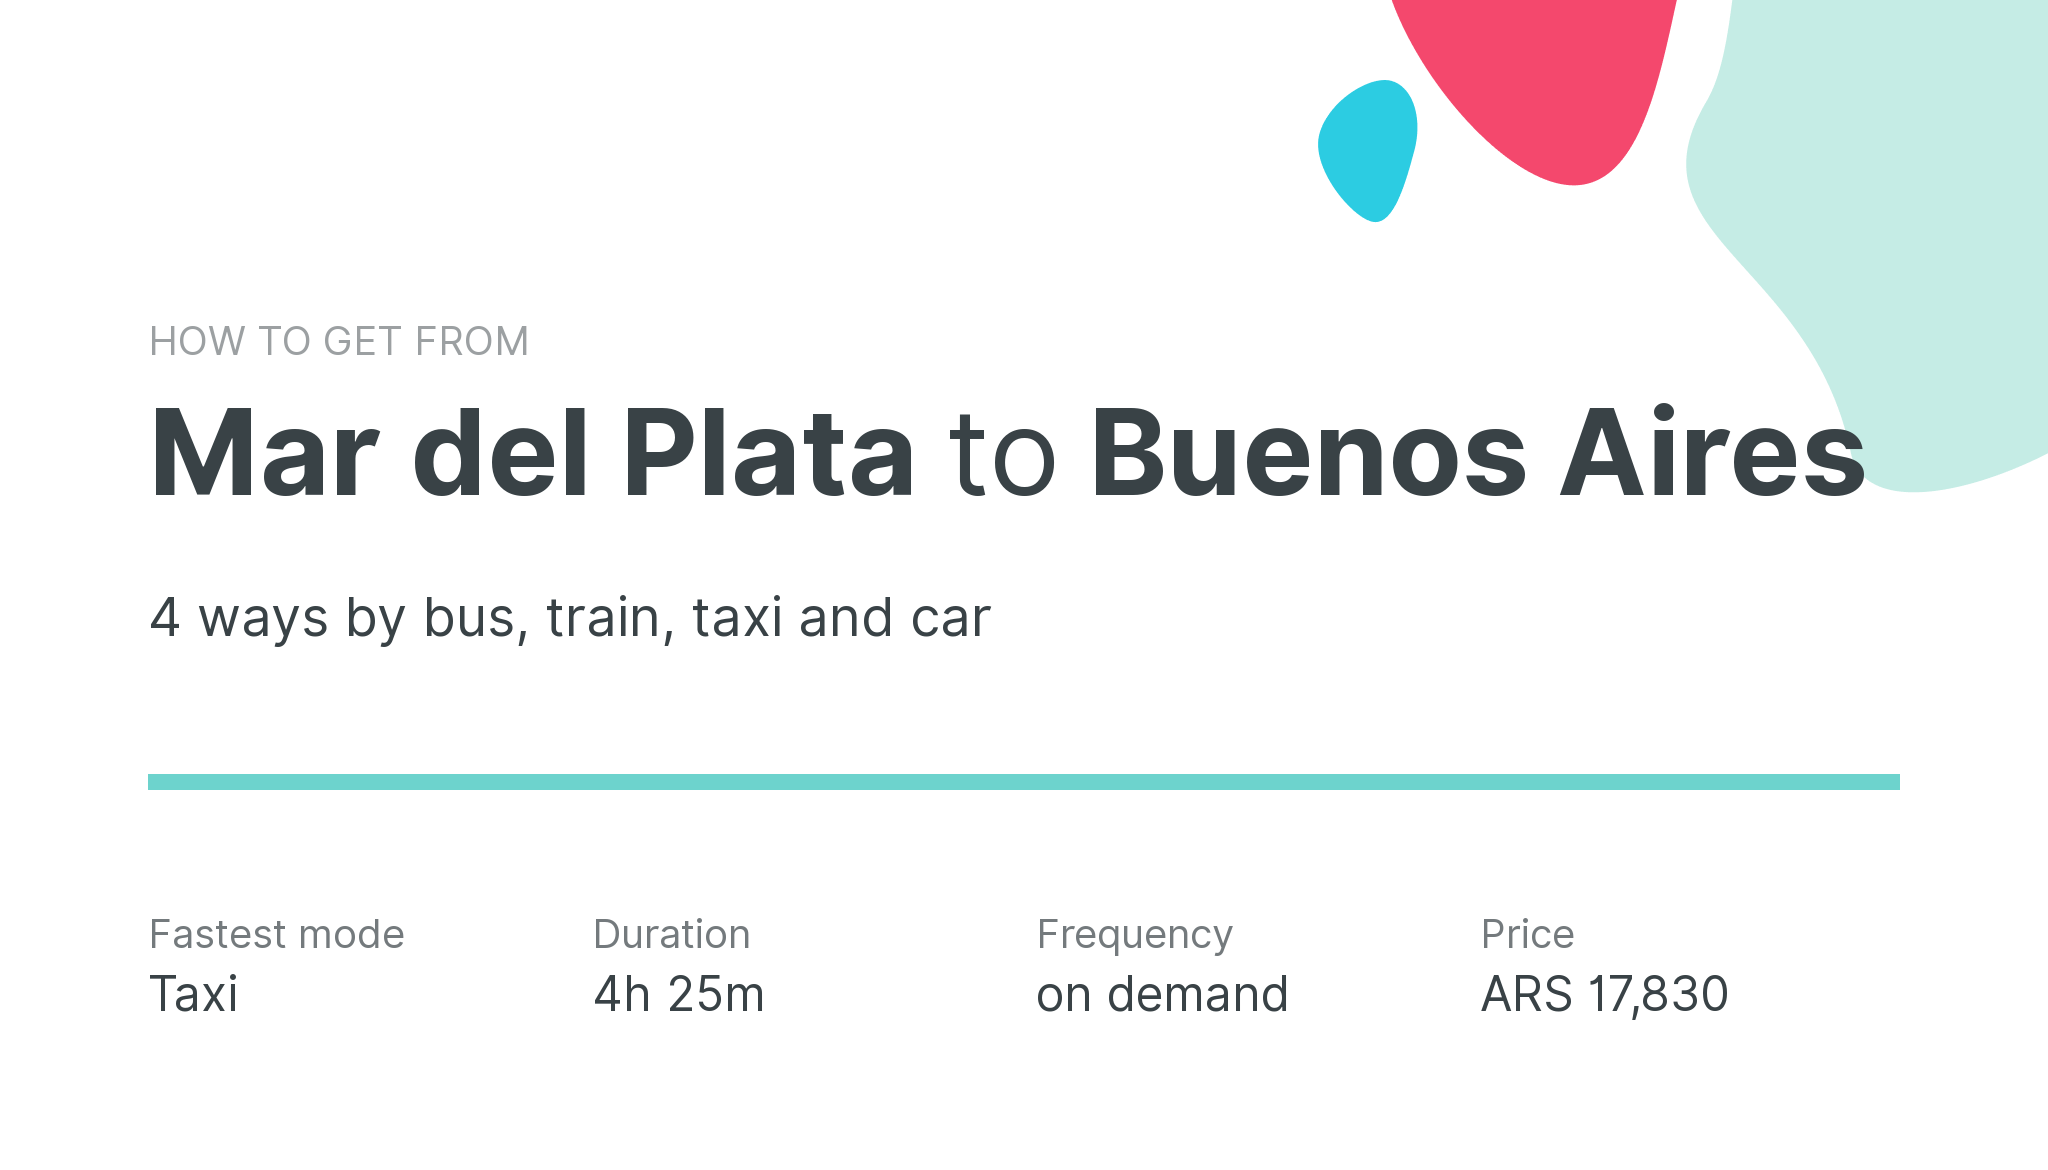 How do I get from Mar del Plata to Buenos Aires